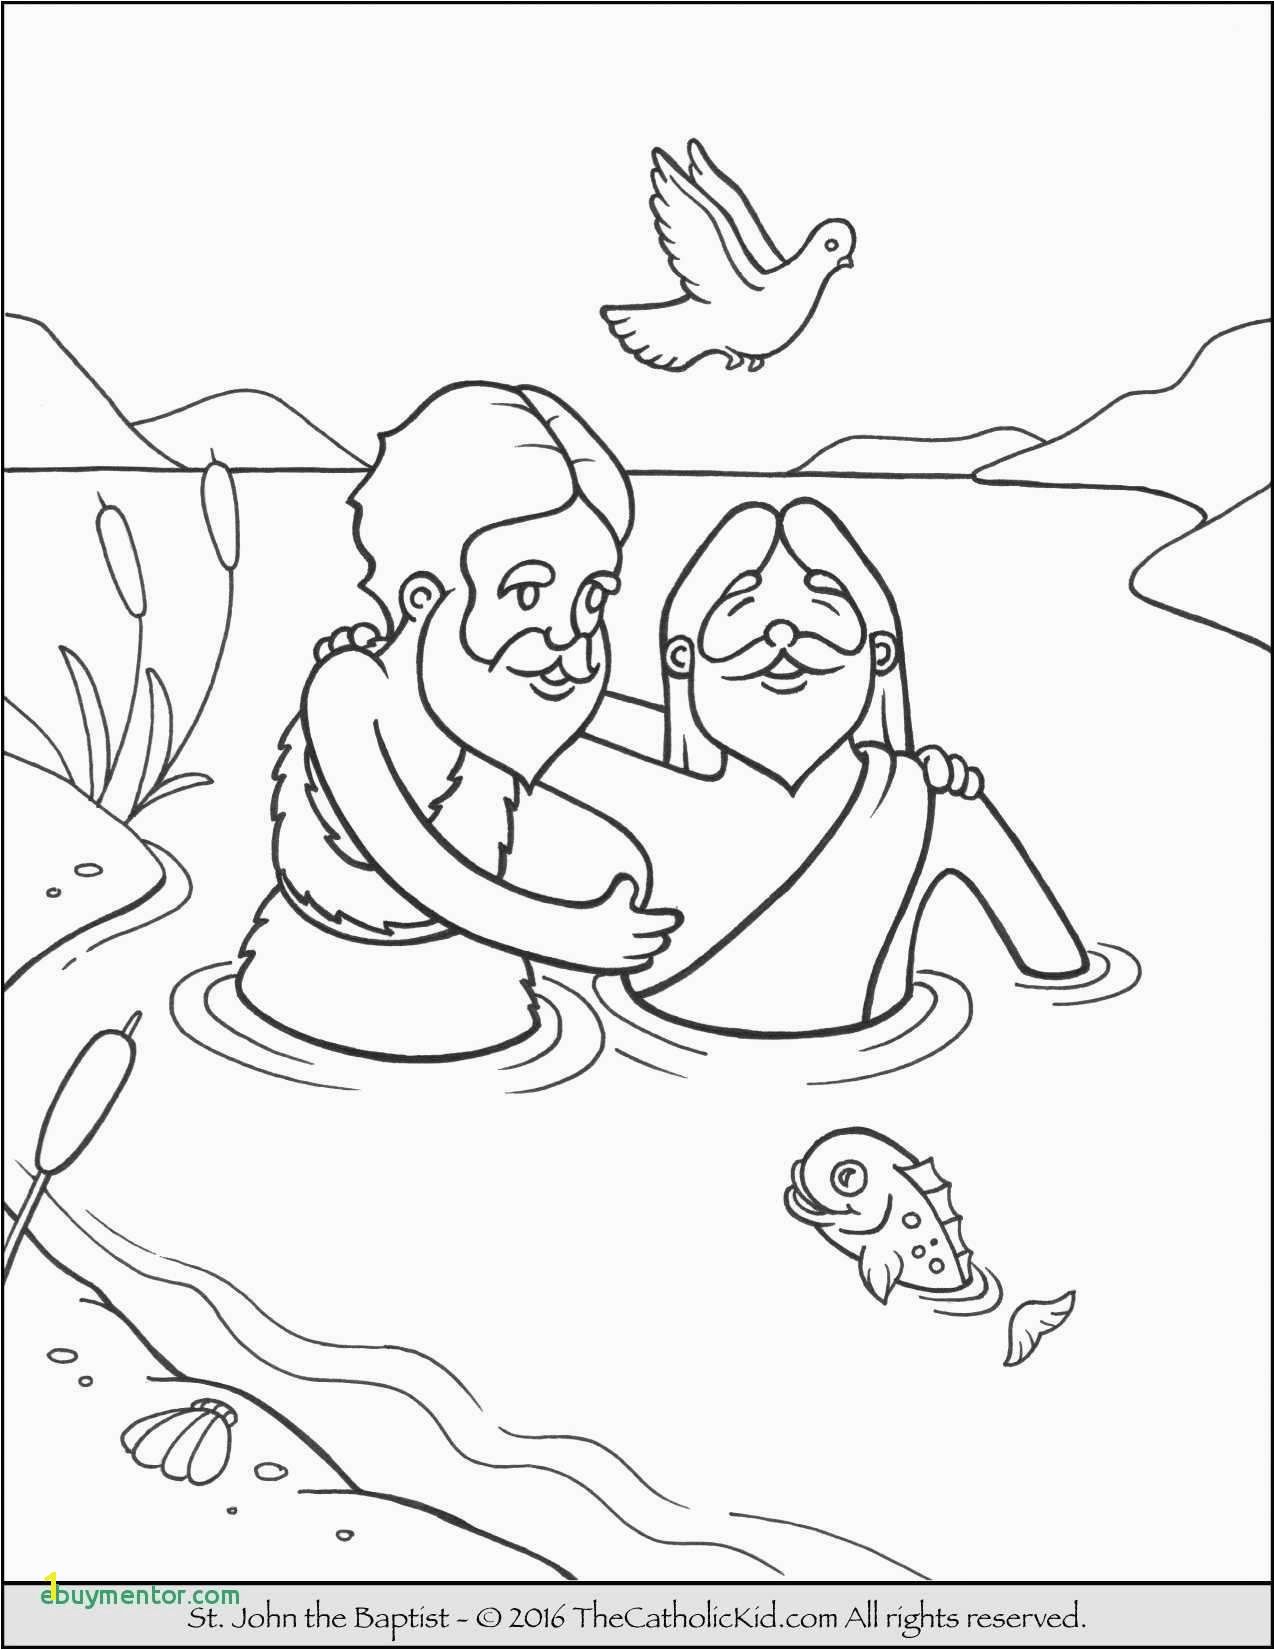 Christmas Scene Printable Coloring Pages Jesus and the Children Coloring Page Inspirational Cartoon Od